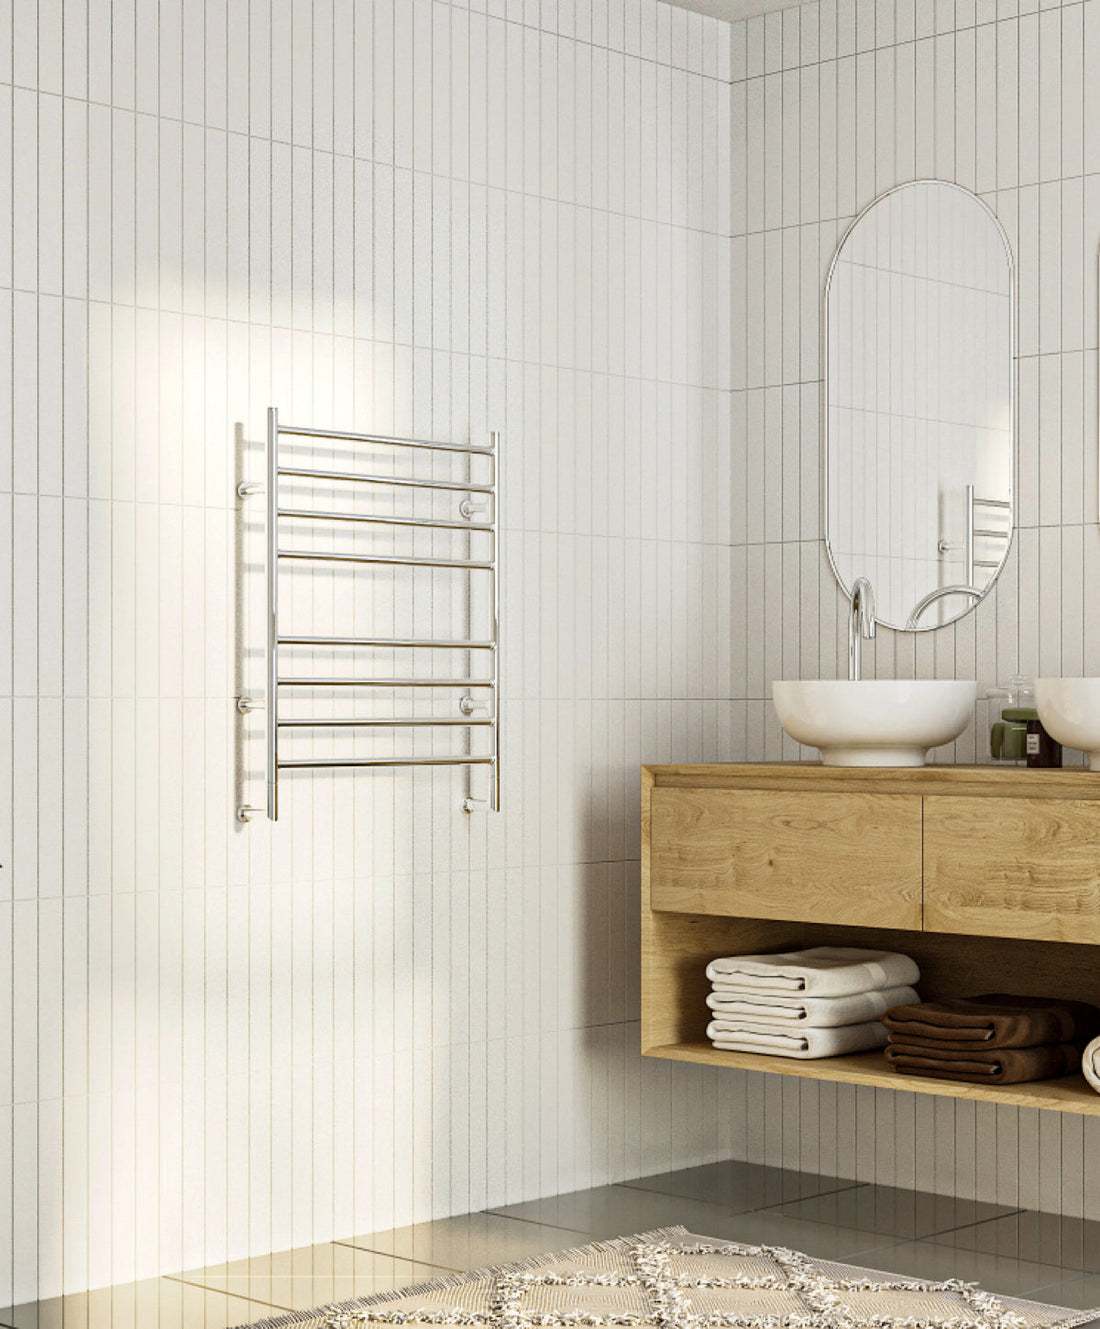 HYDROTHERM H Series - H2 Model - Heated Towel Rail (Non Electric)